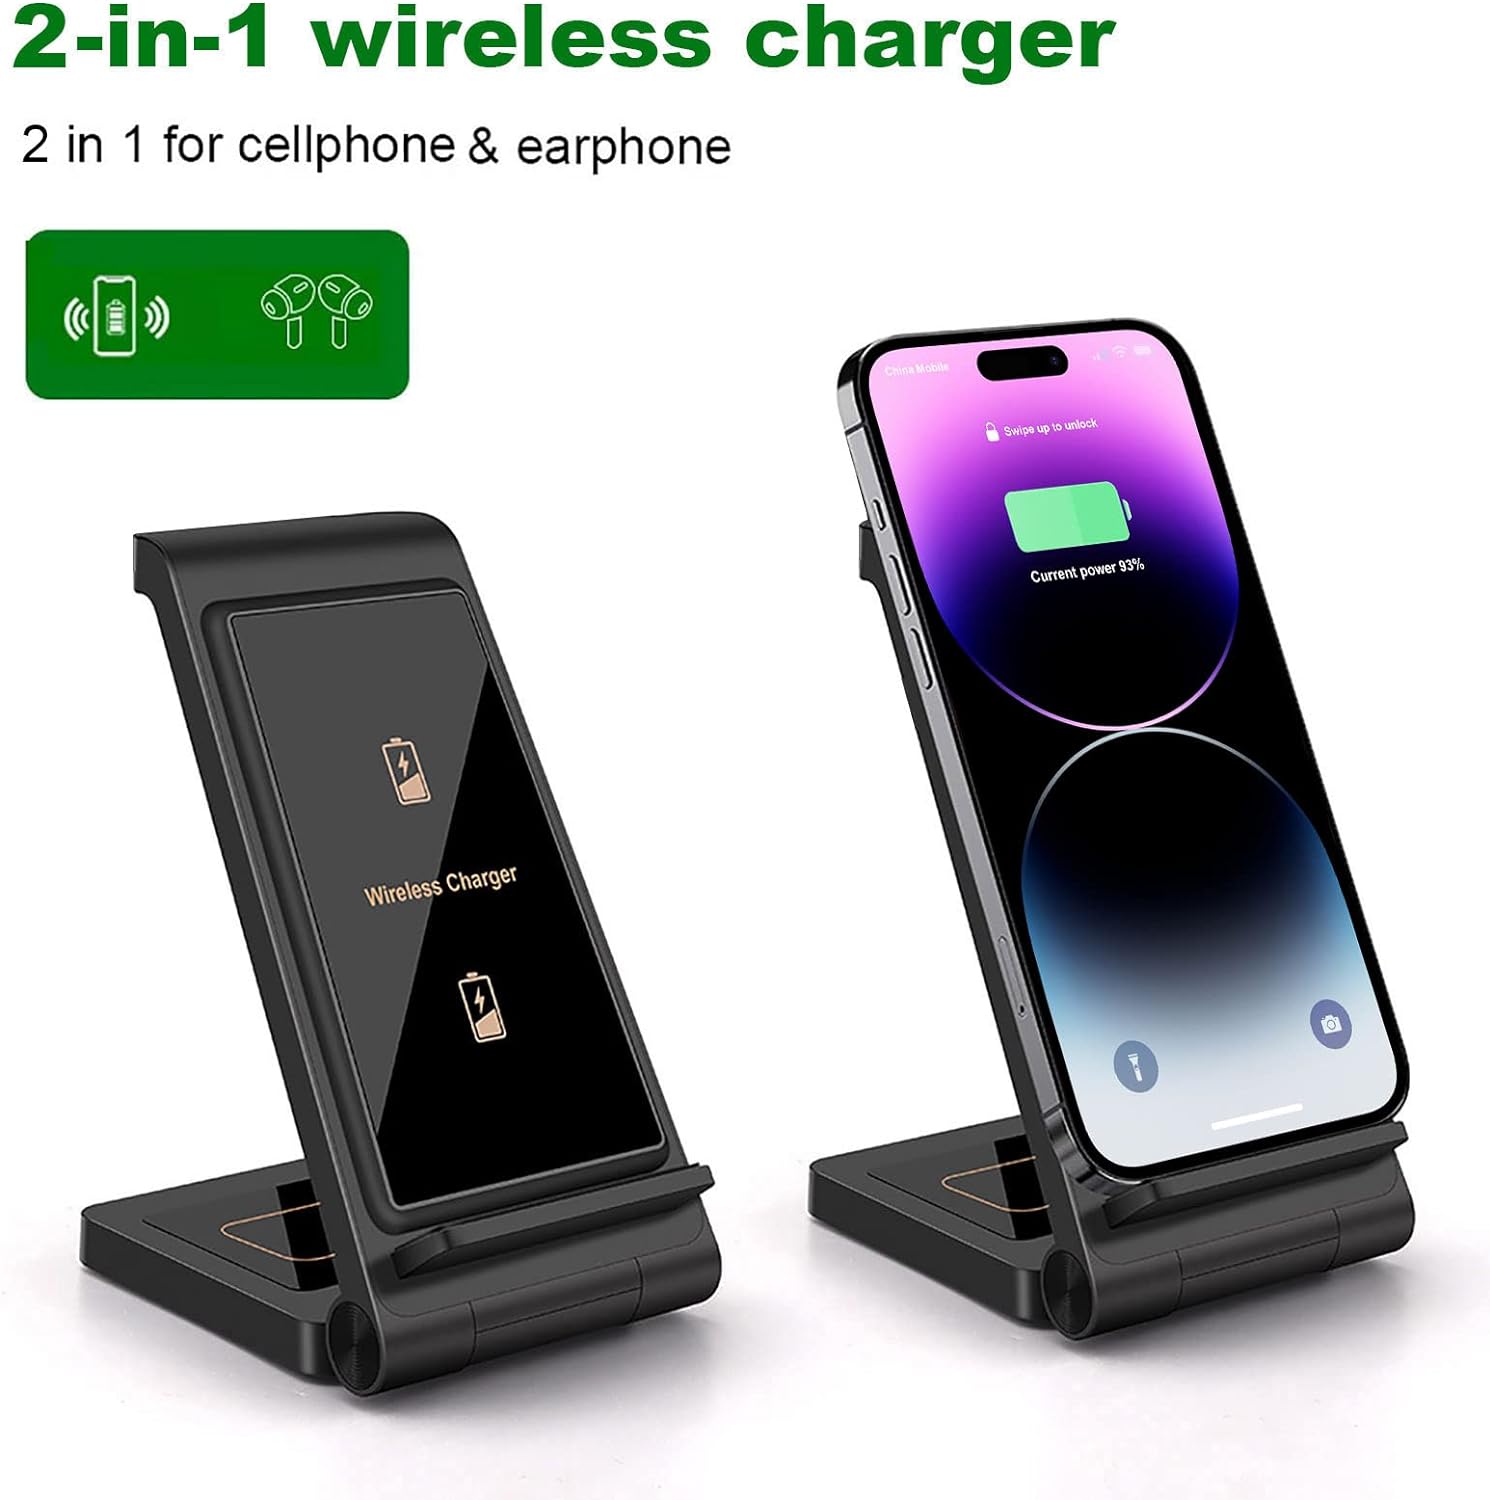 25W Wireless Charger,Foldable 2 in 1 Wireless Charging Station for Apple iPhone 14/13/12/11/Plus/Pro/SE/X/8/Airpods,PDKUAI 15W Fast Dual Wireless Induction Charge Stand for Samsung Phone/Galaxy Buds